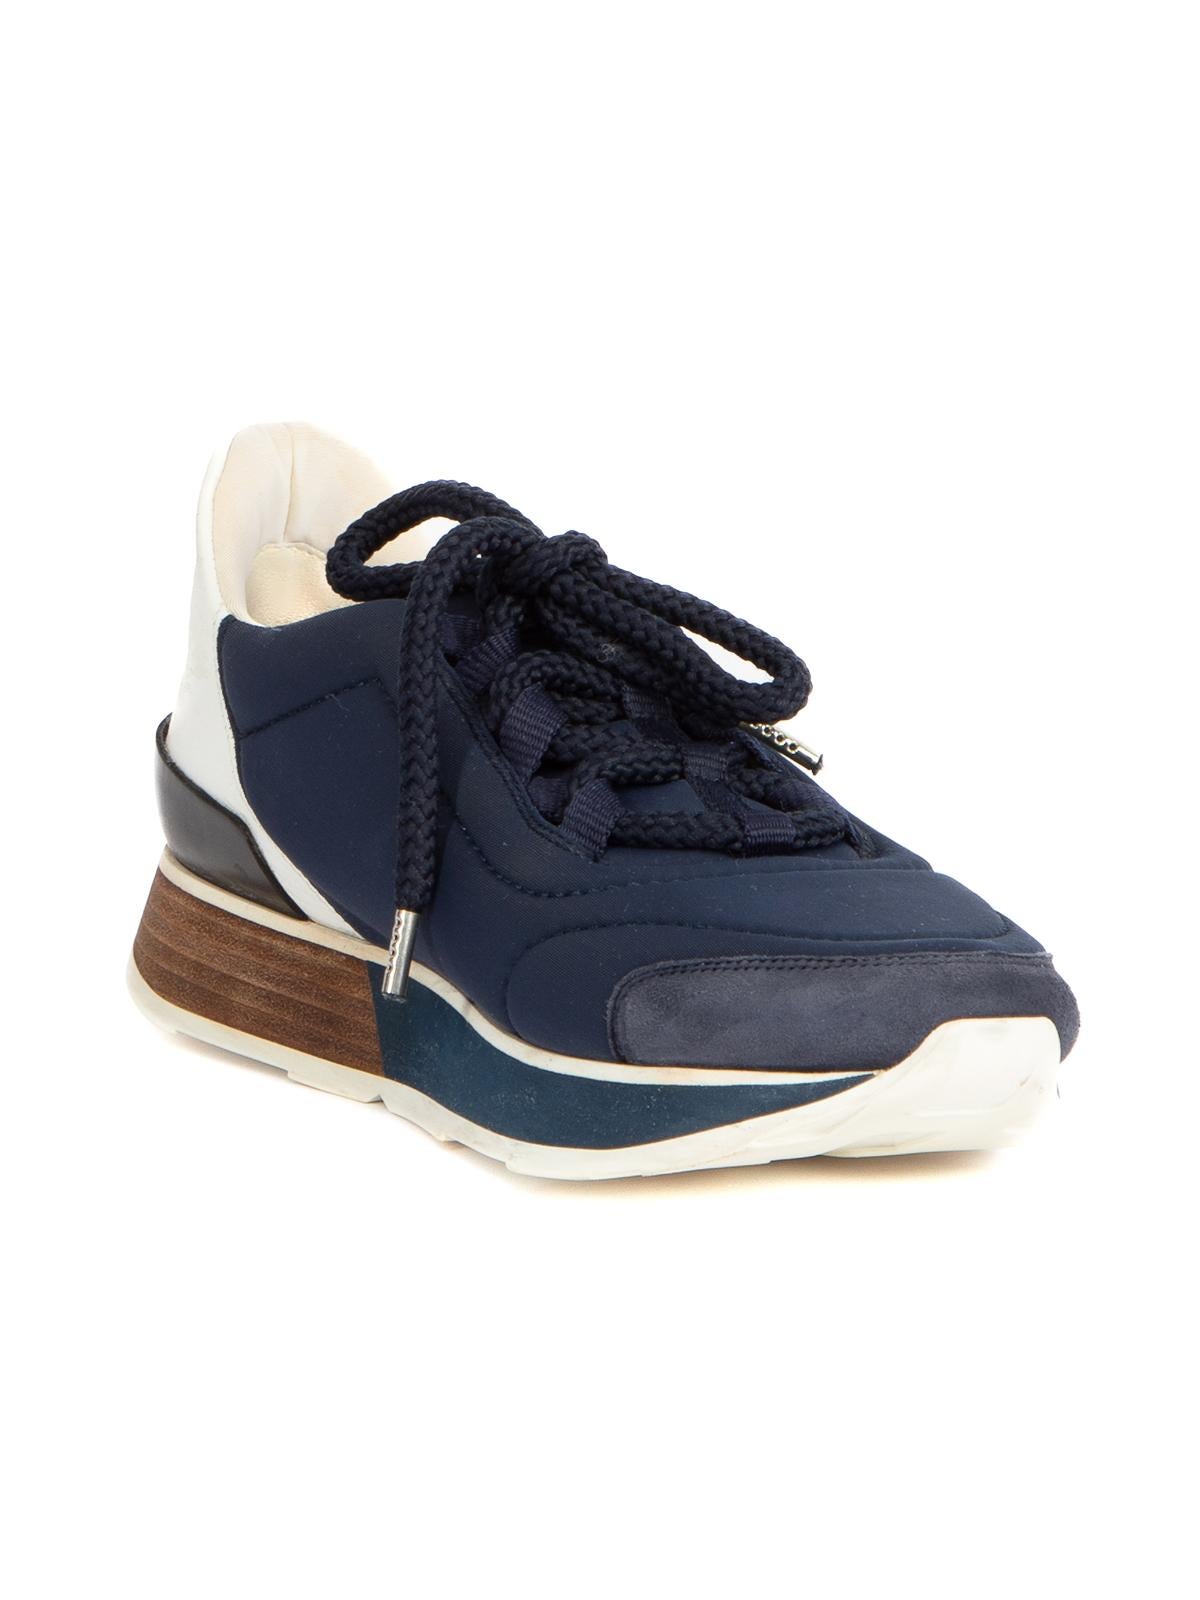 CONDITION is Very good. Minimal wear to sneakers is evident. Minimal wear suede around the toe of shoe on this used Hermes designer resale item.   Details  Navy with white, black and brown Cloth- nylon Low top Lace up Suede toe point Almond toe   